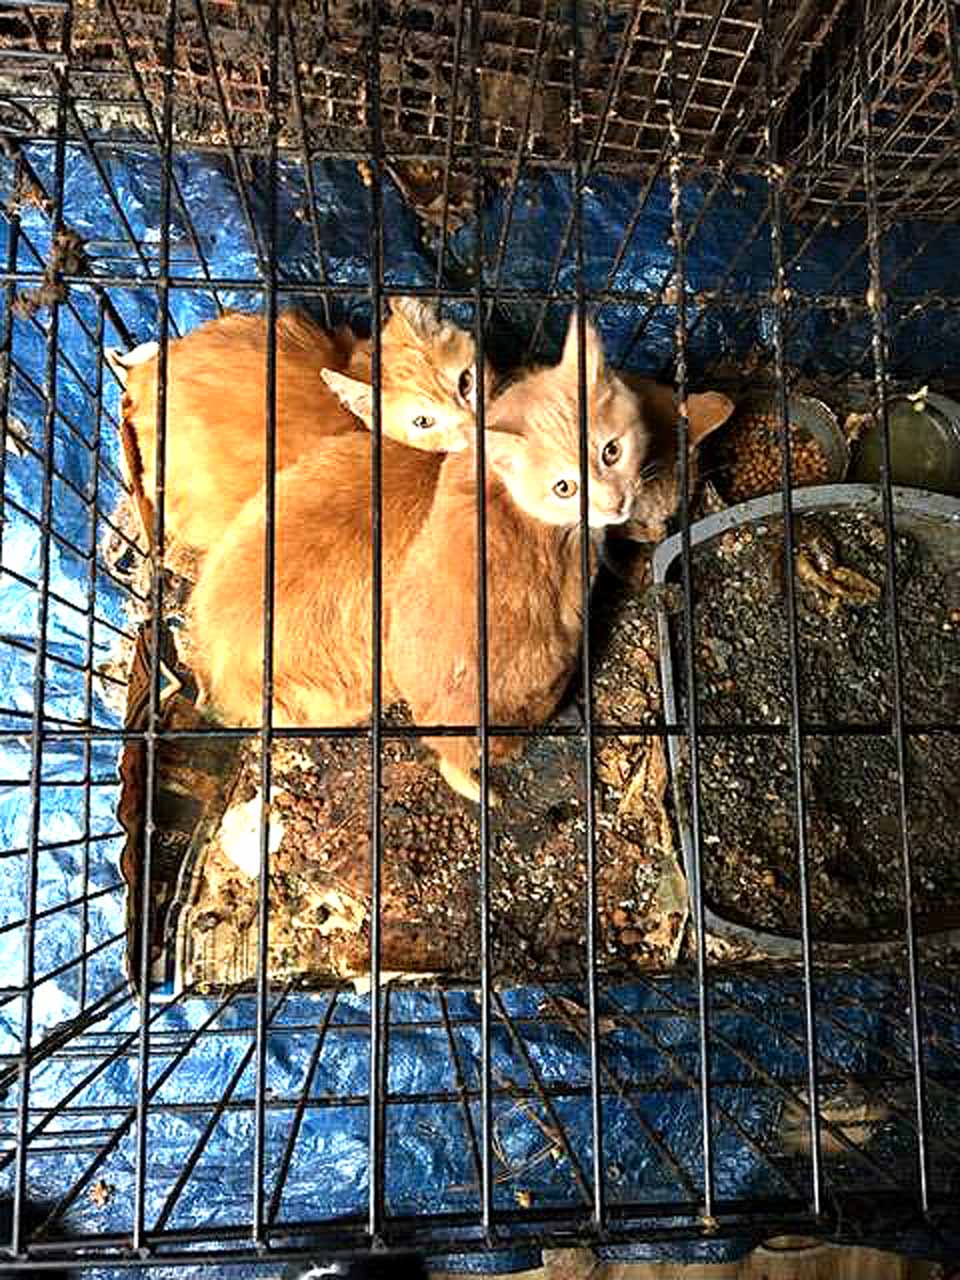 These two cats, in a cage on a feces-covered floor in a West Oneonta home, were among 36 rescued last Thursday and Friday now being tended at the Susquehanna Animal Shelter in Hartwick Seminary. Today, Shelter Director Stacie Haynes wrote an $1,800 check for medications alone for the animals, most of whom are facing at least respiratory problems. The West Oneonta Volunteer Fire Department conducted a drive over the weekend for supplies to tend the cats, but the shelter issued a call for emergency donations to help meet the crisis. Donations may be made via PayPal, or checks may be sent to SAS, 4841 NY-28, Cooperstown, NY 13326.